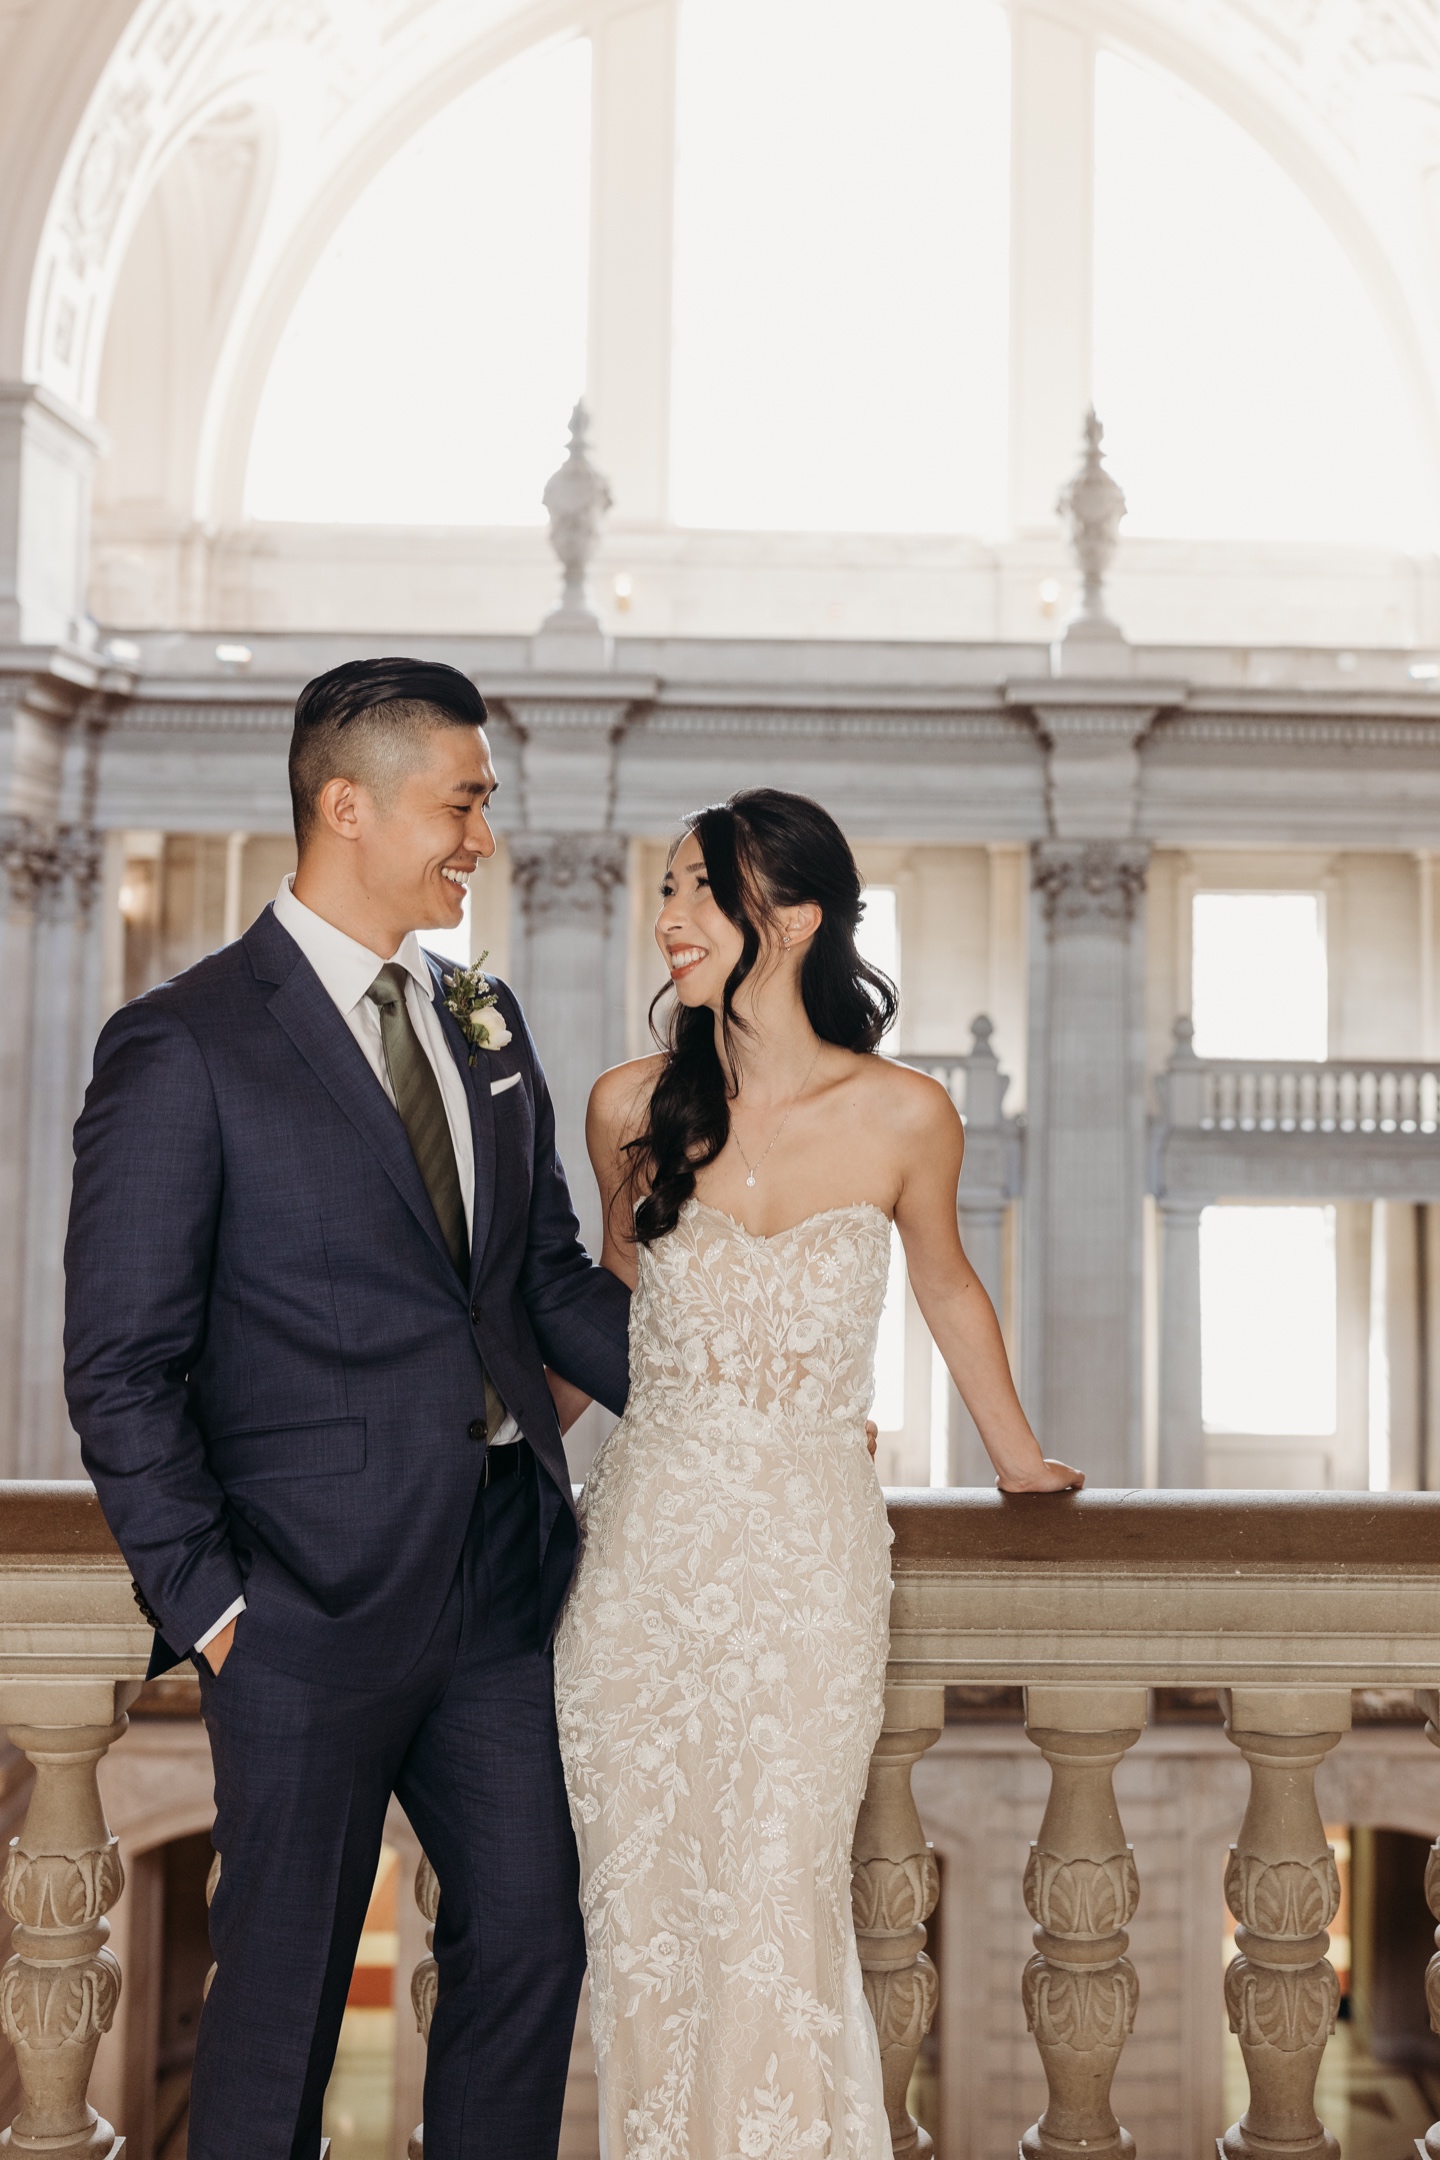 Bride and groom sand side by side smiling at each other in a San Francisco City Hall balcony.